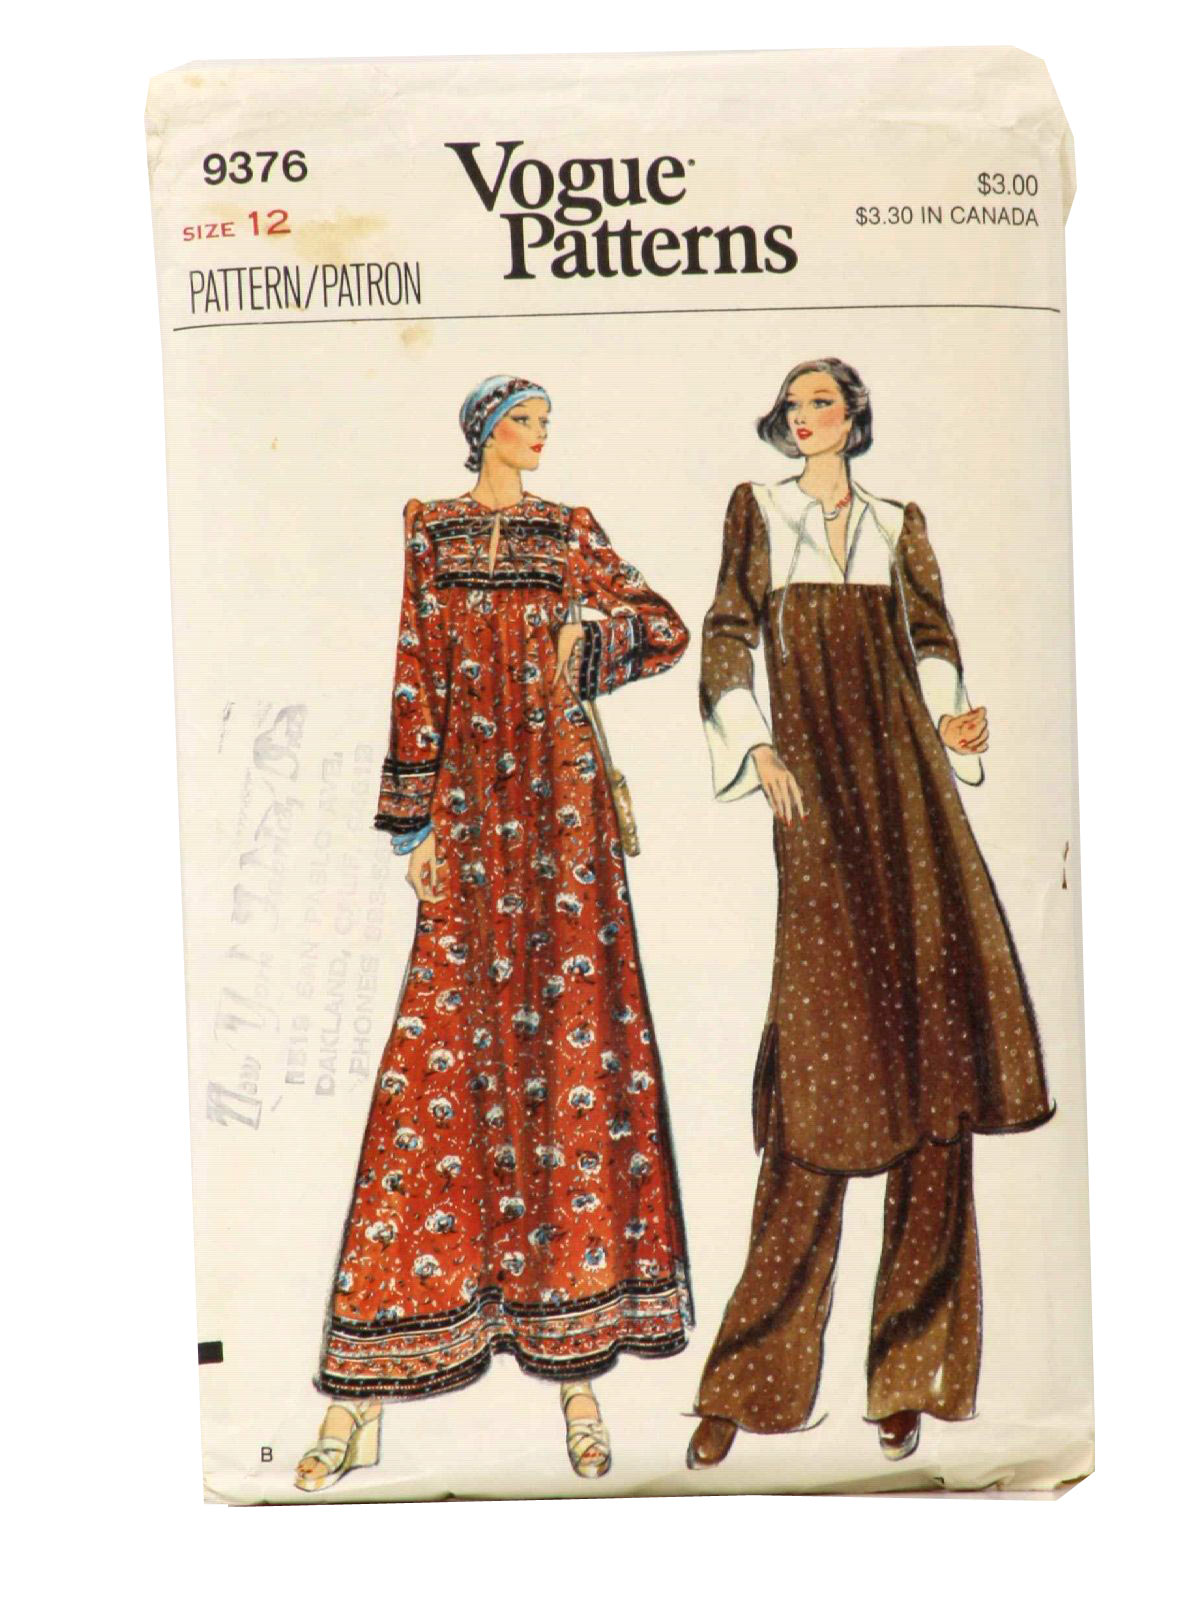 Retro Seventies Sewing Pattern: Mid-70s -Vogue Pattern No. 9376- Womens ...